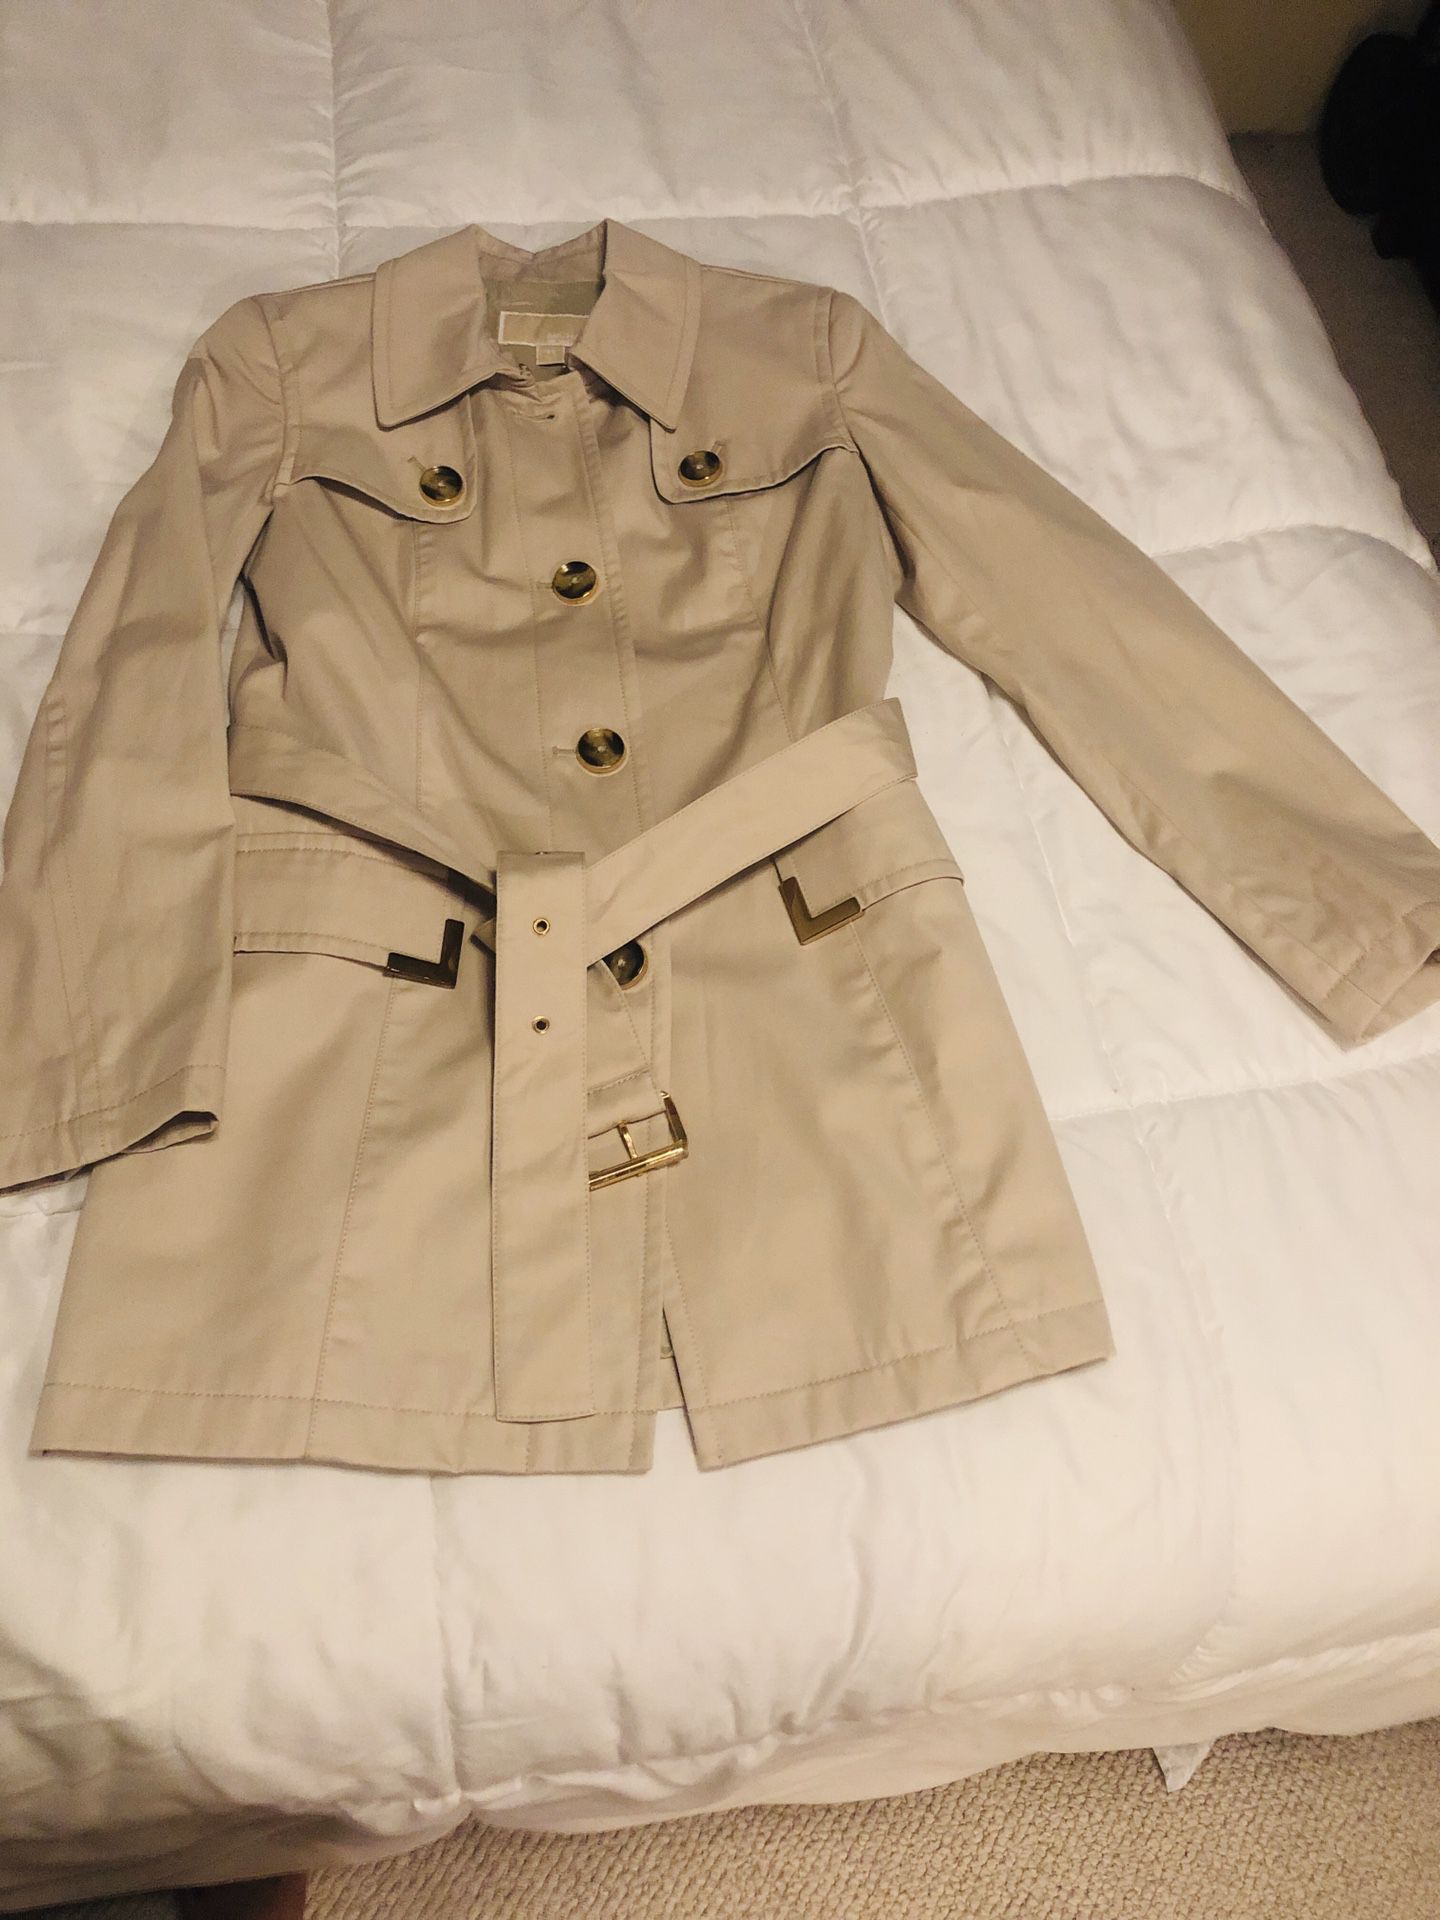 AUTHENTIC- X Small, Michael Kors Jacket. Excellent Condition !!